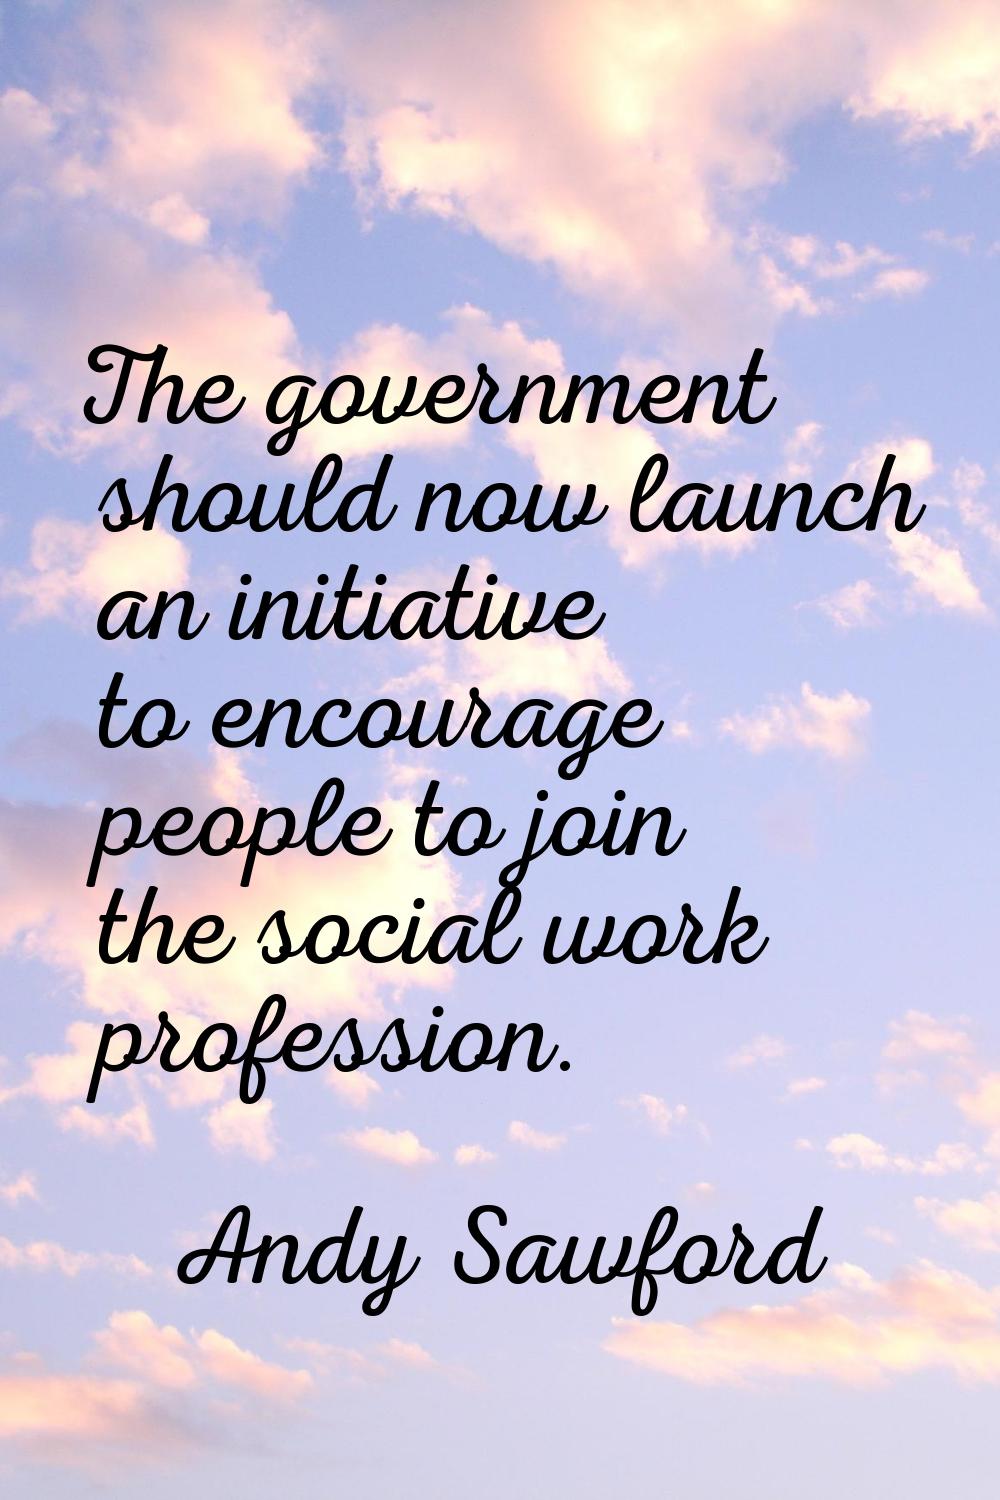 The government should now launch an initiative to encourage people to join the social work professi